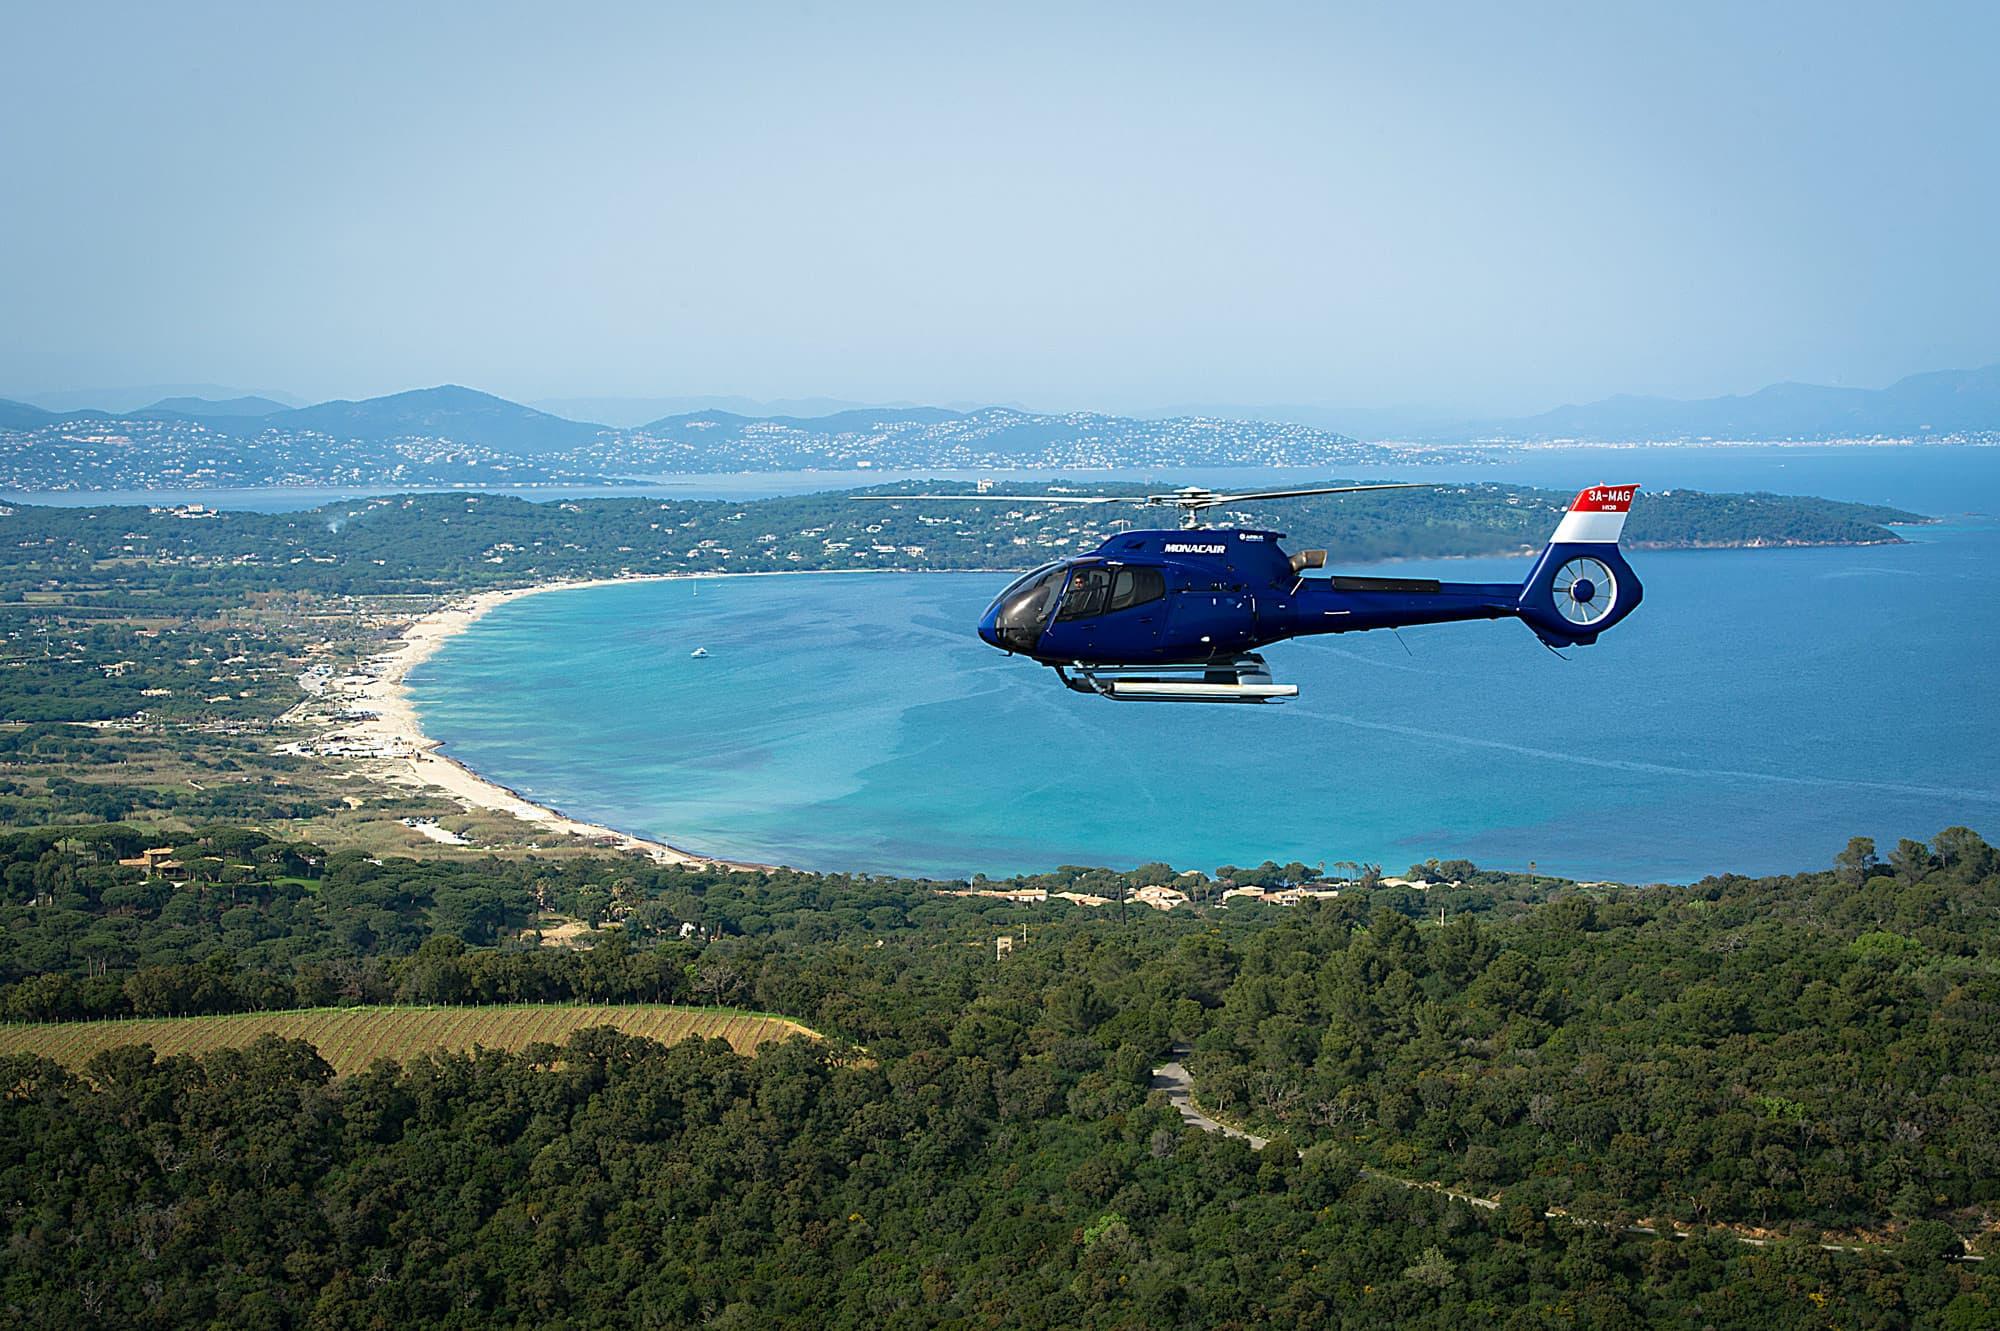 Monacair helicopter shuttle